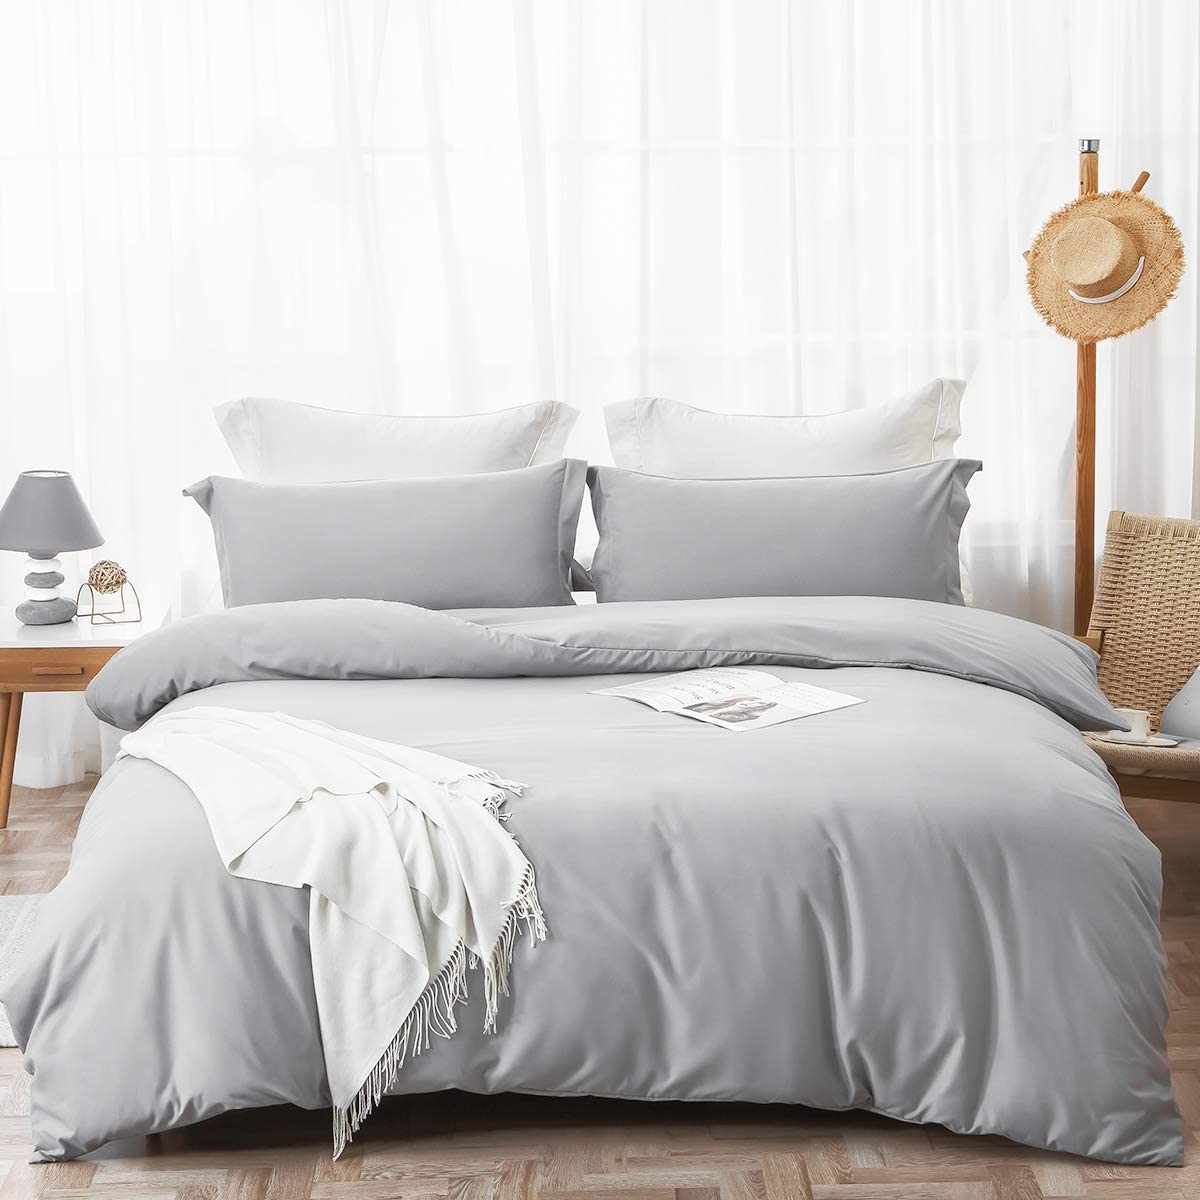 Price:$33.99  Duvet Cover Full/Queen Size Grey, Soft Washed Microfiber 3 Pieces with Zipper Closure(1 Duvet Cover + 2 Pillow Shams), 90x90 inches : Home & Kitchen